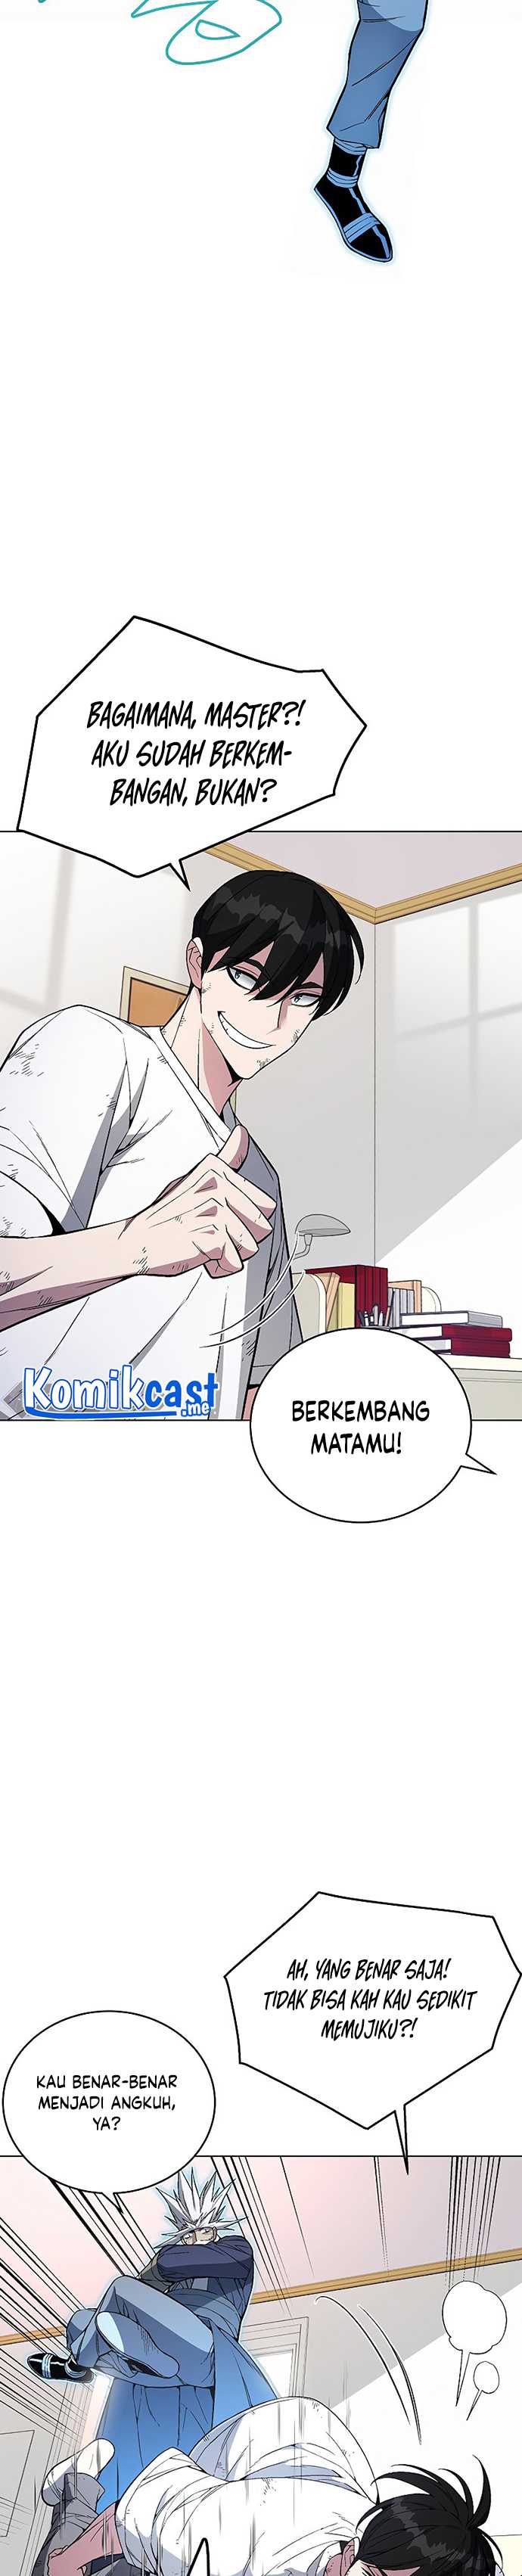 Heavenly Demon Instructor Chapter 47